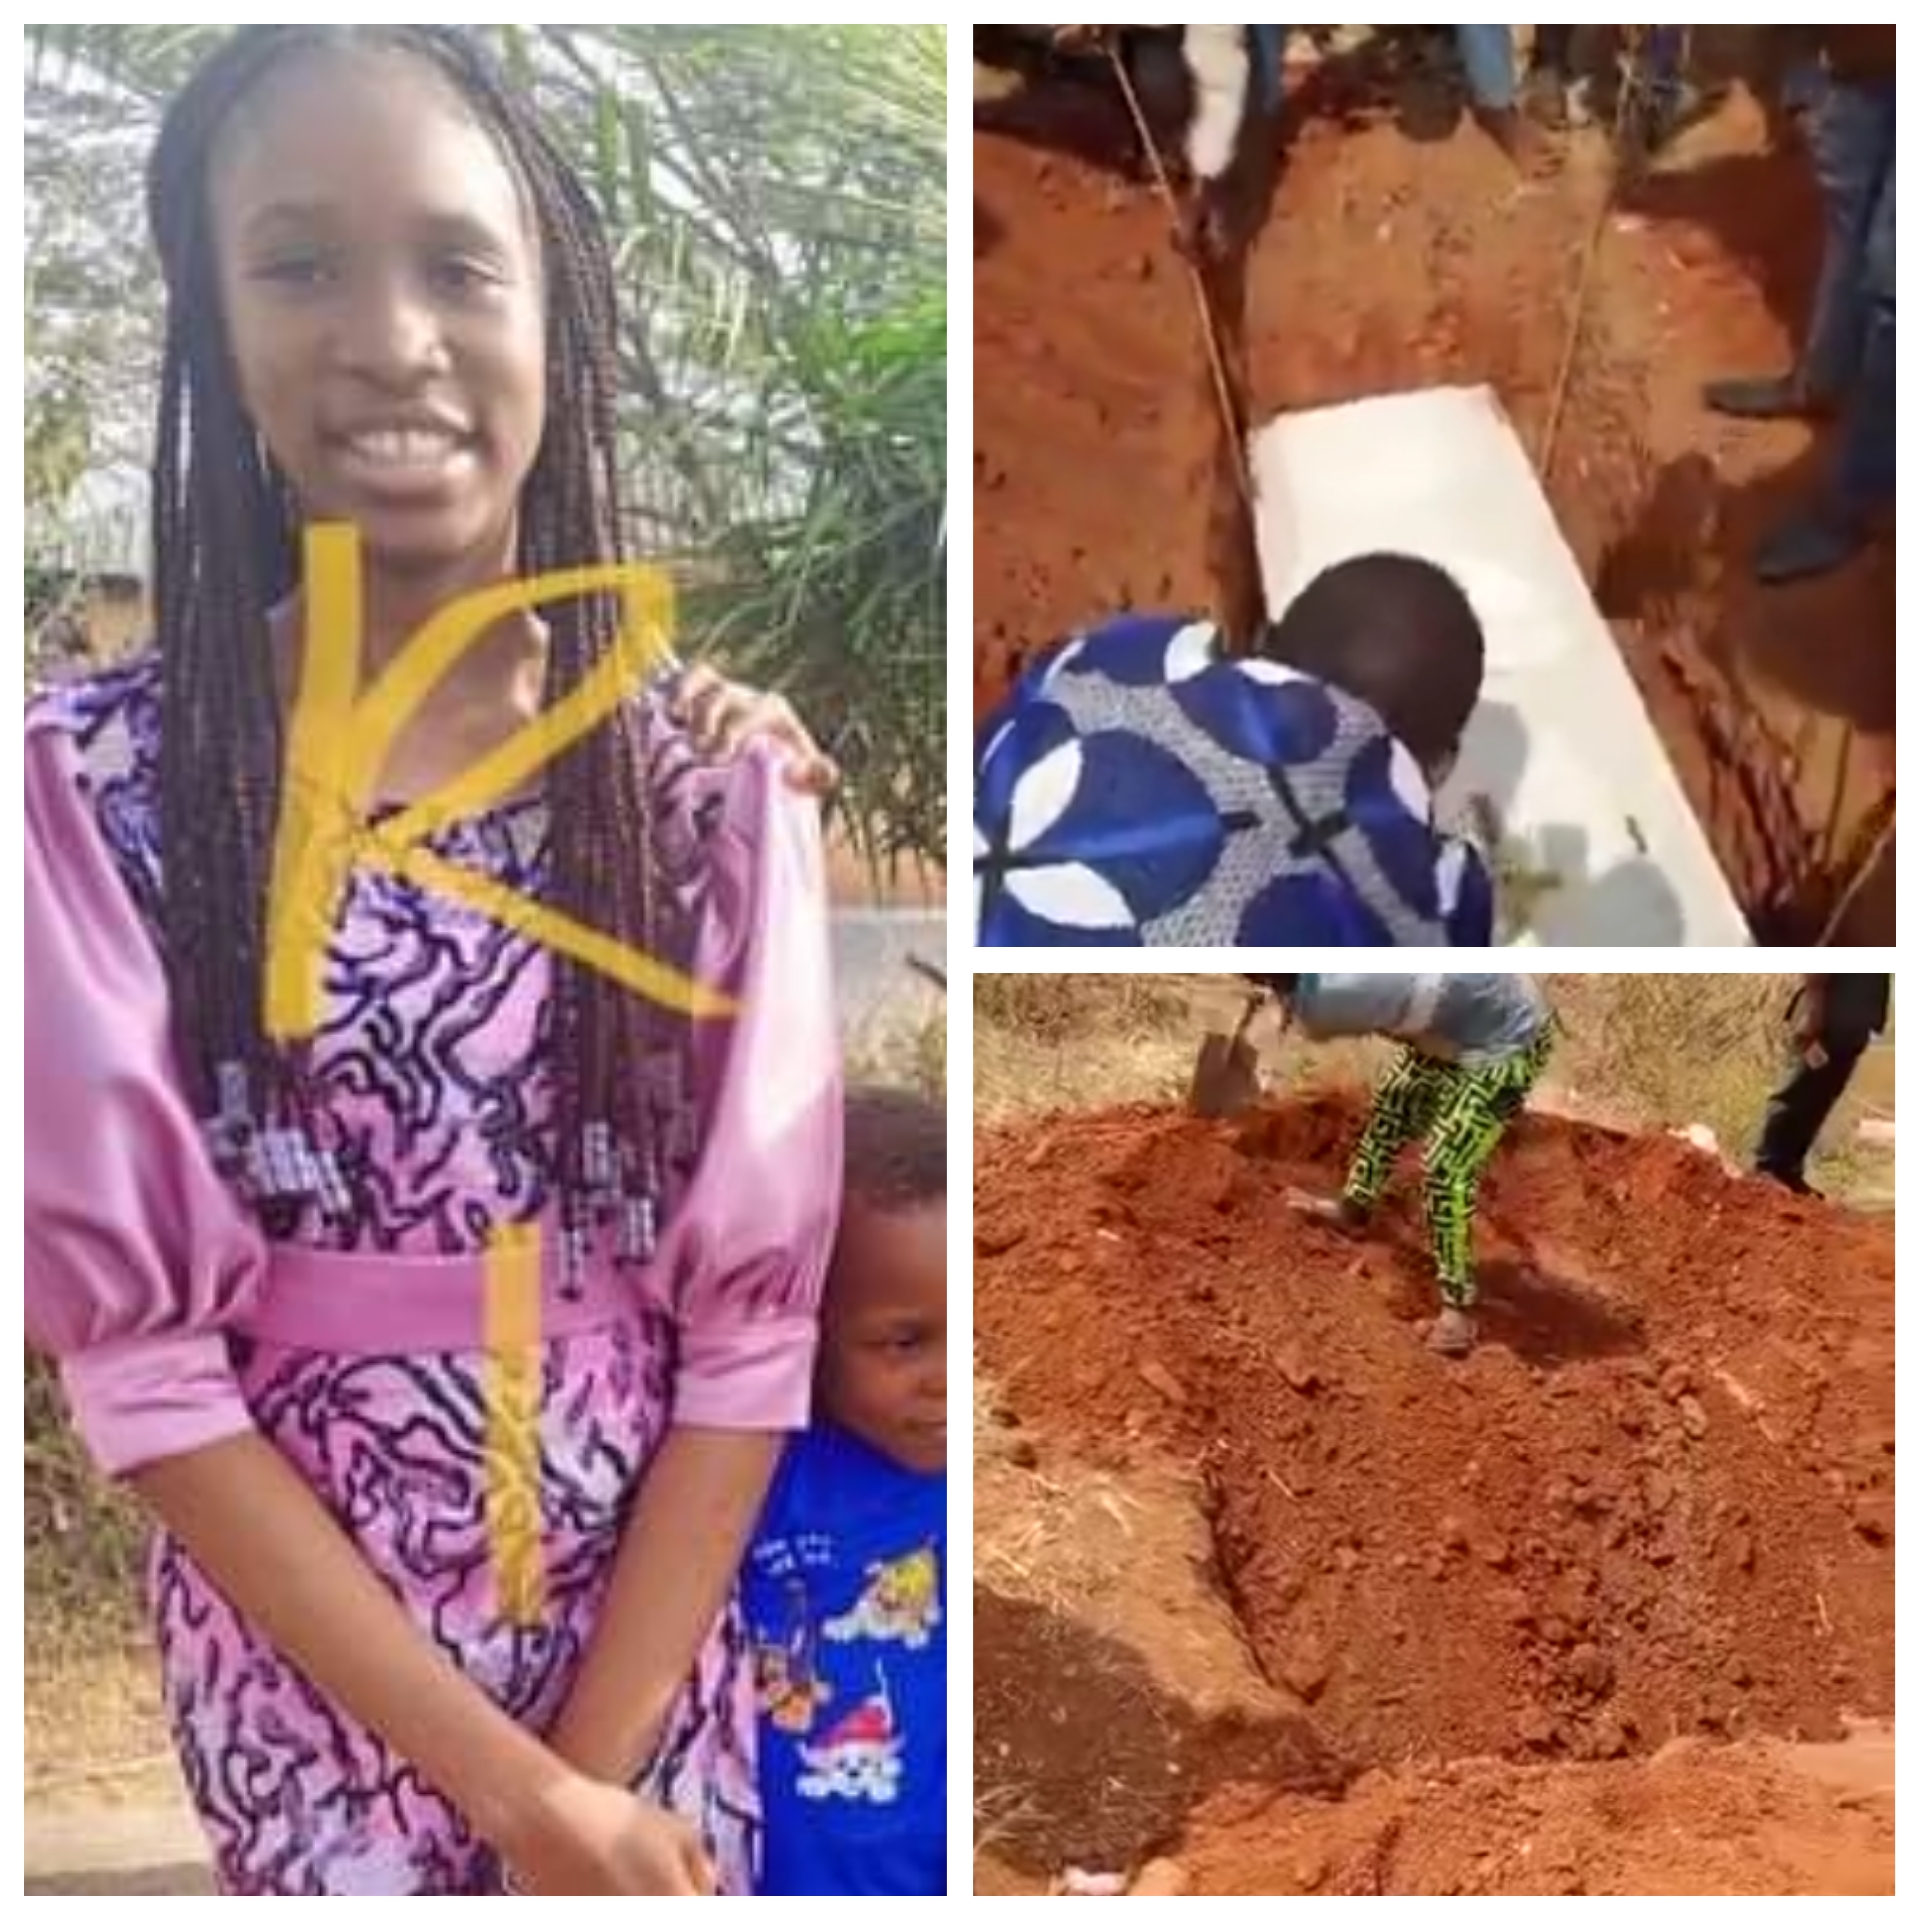 Kidnappers kill teenage girl abducted along with her mother and three siblings in Abuja after family failed to pay N60m ransom (videos)